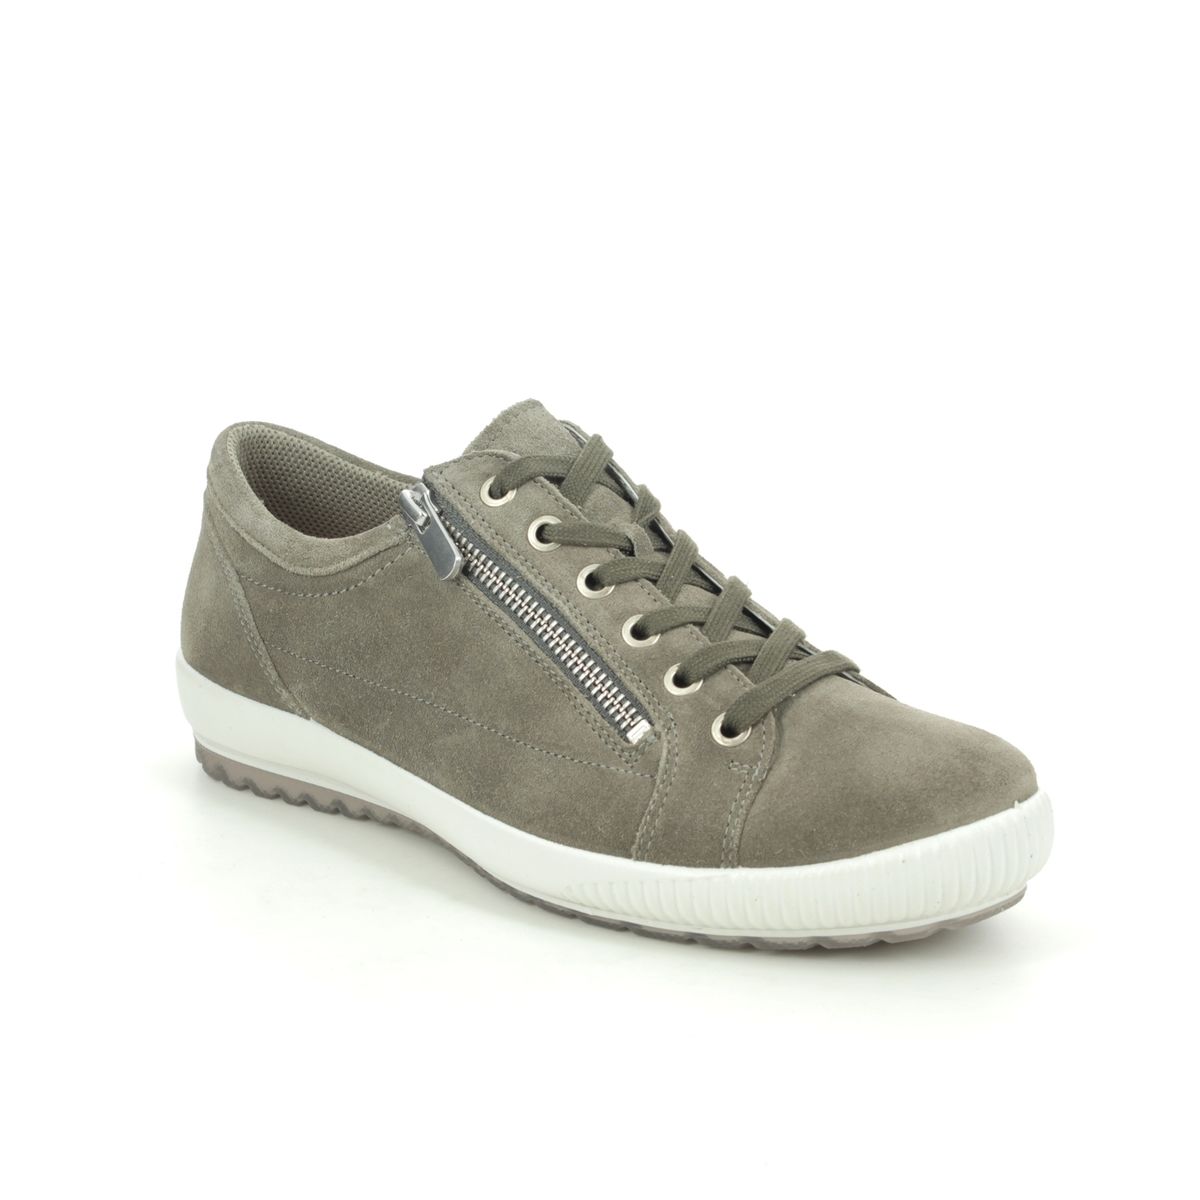 Legero Tanaro Zip Taupe suede Womens lacing shoes 0600818-7600